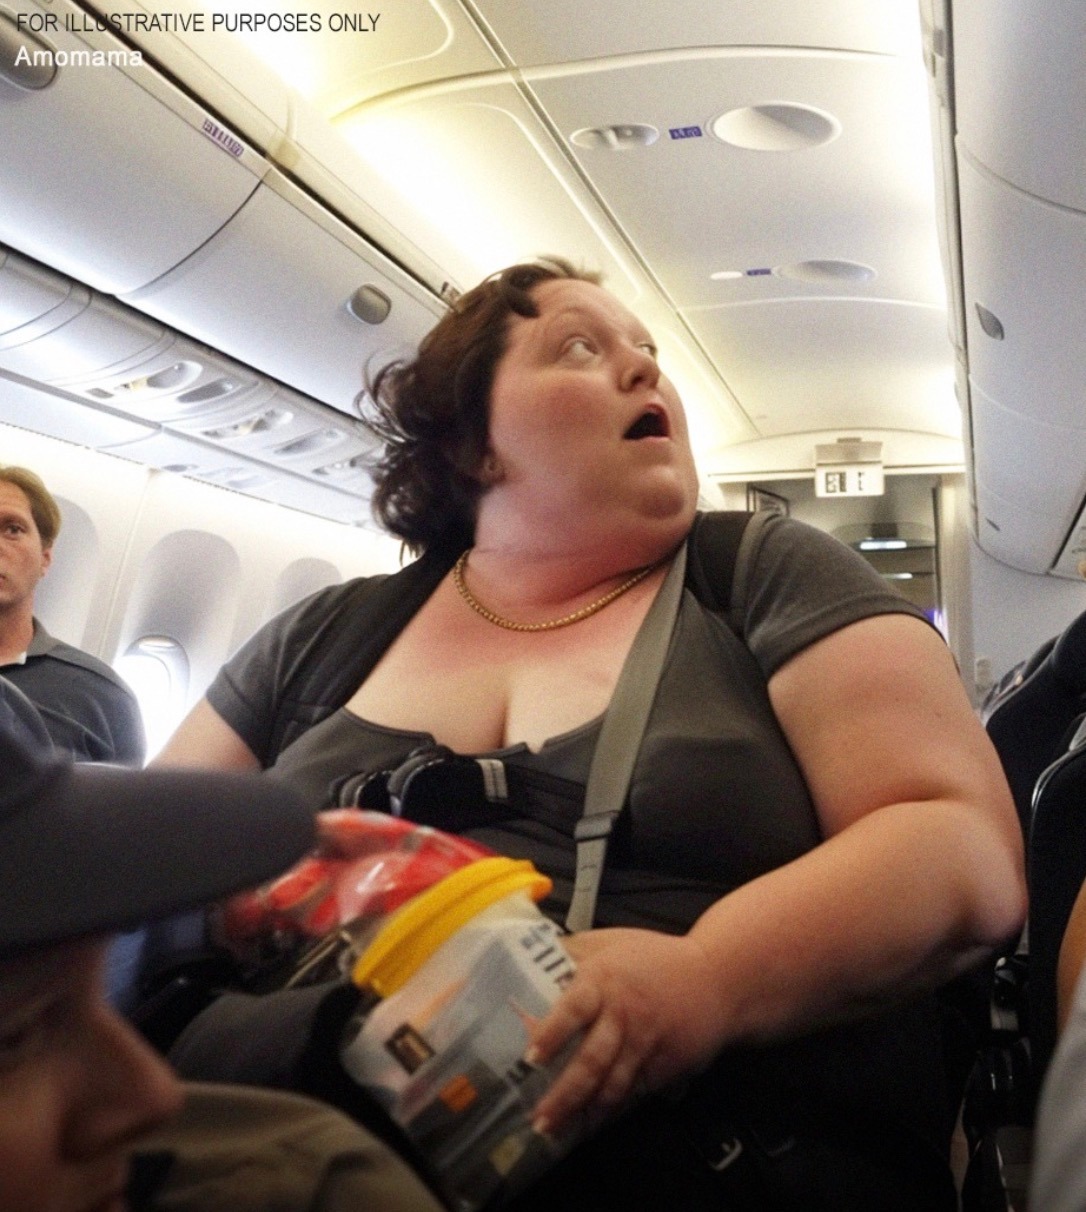 Wealthy Man Ridicules Impoverished Overweight Woman on Flight Until Captain Intervenes